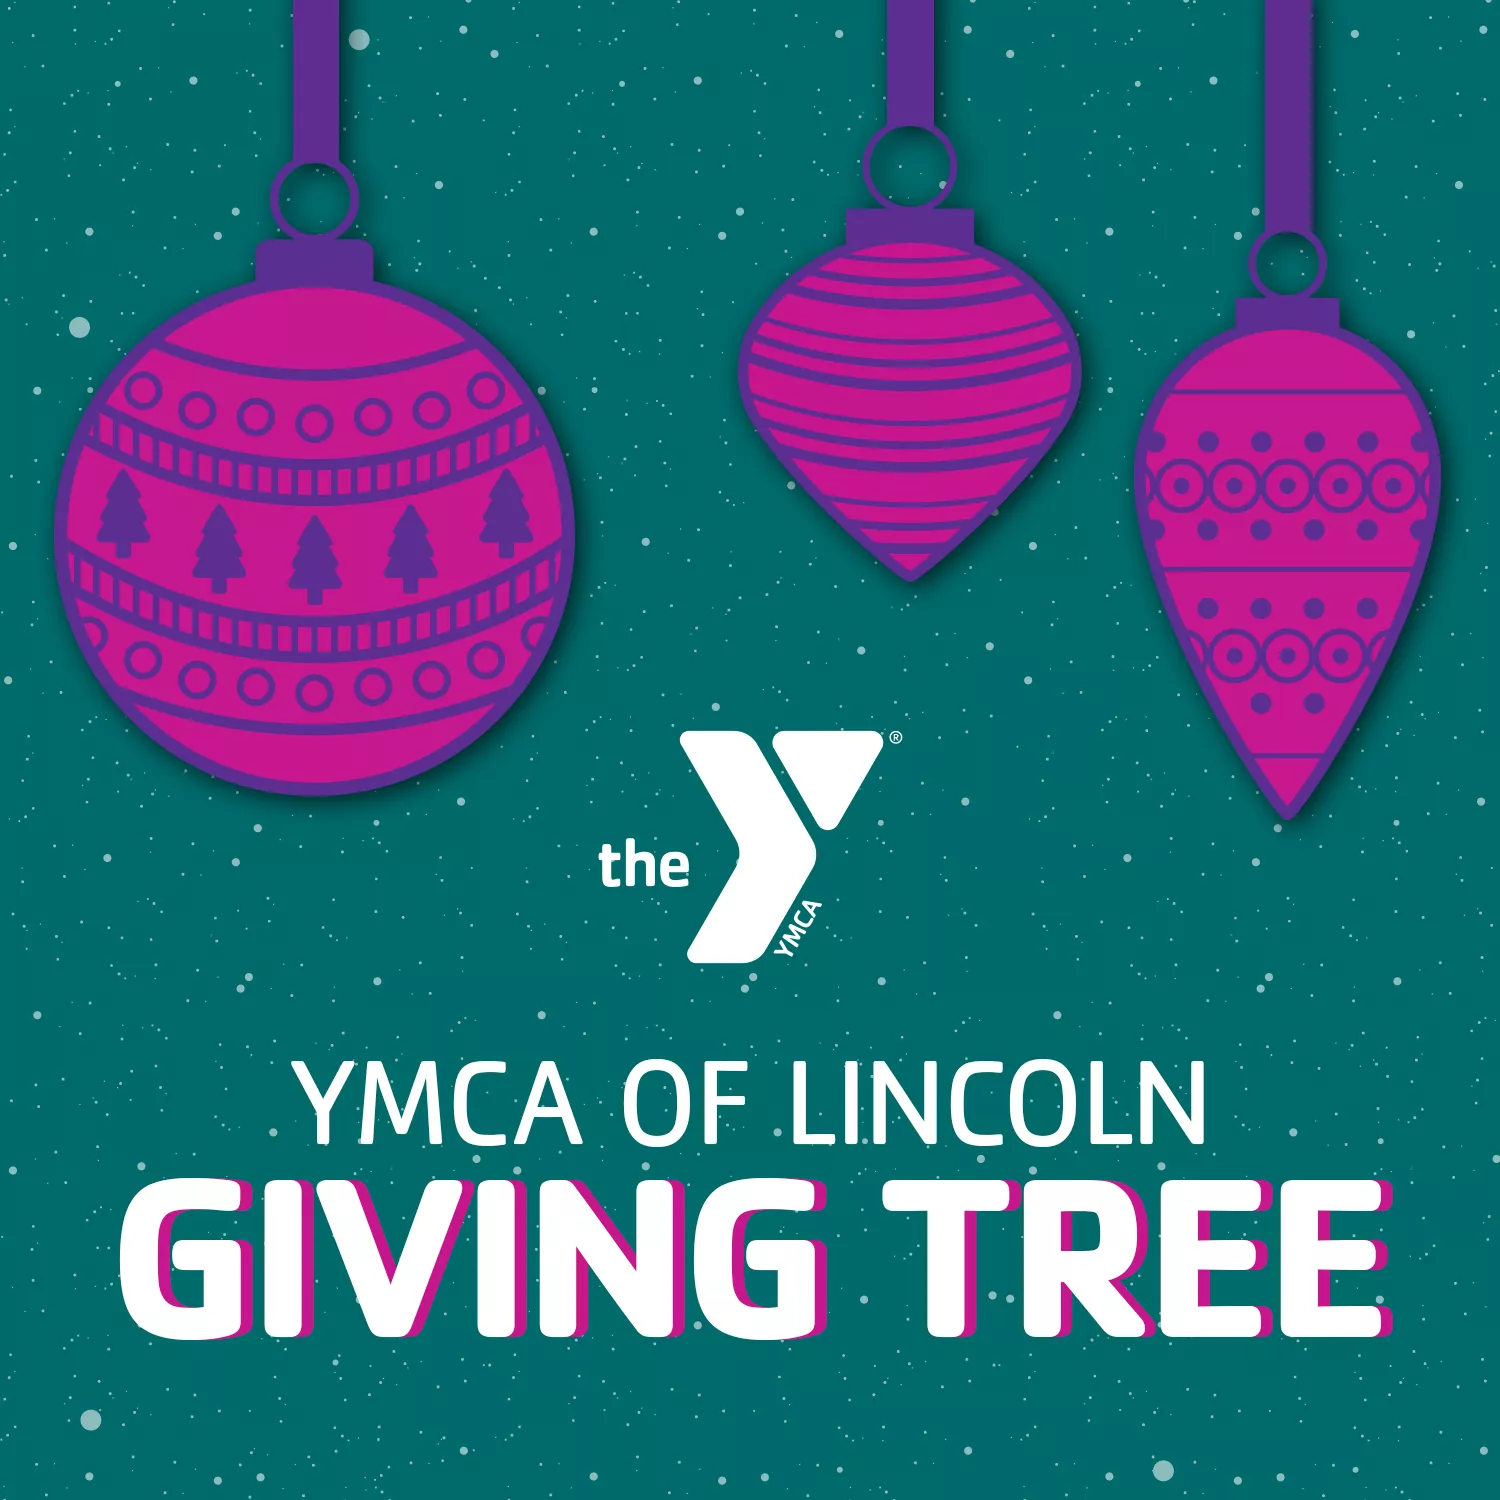 YMCA of Lincoln Giving Tree